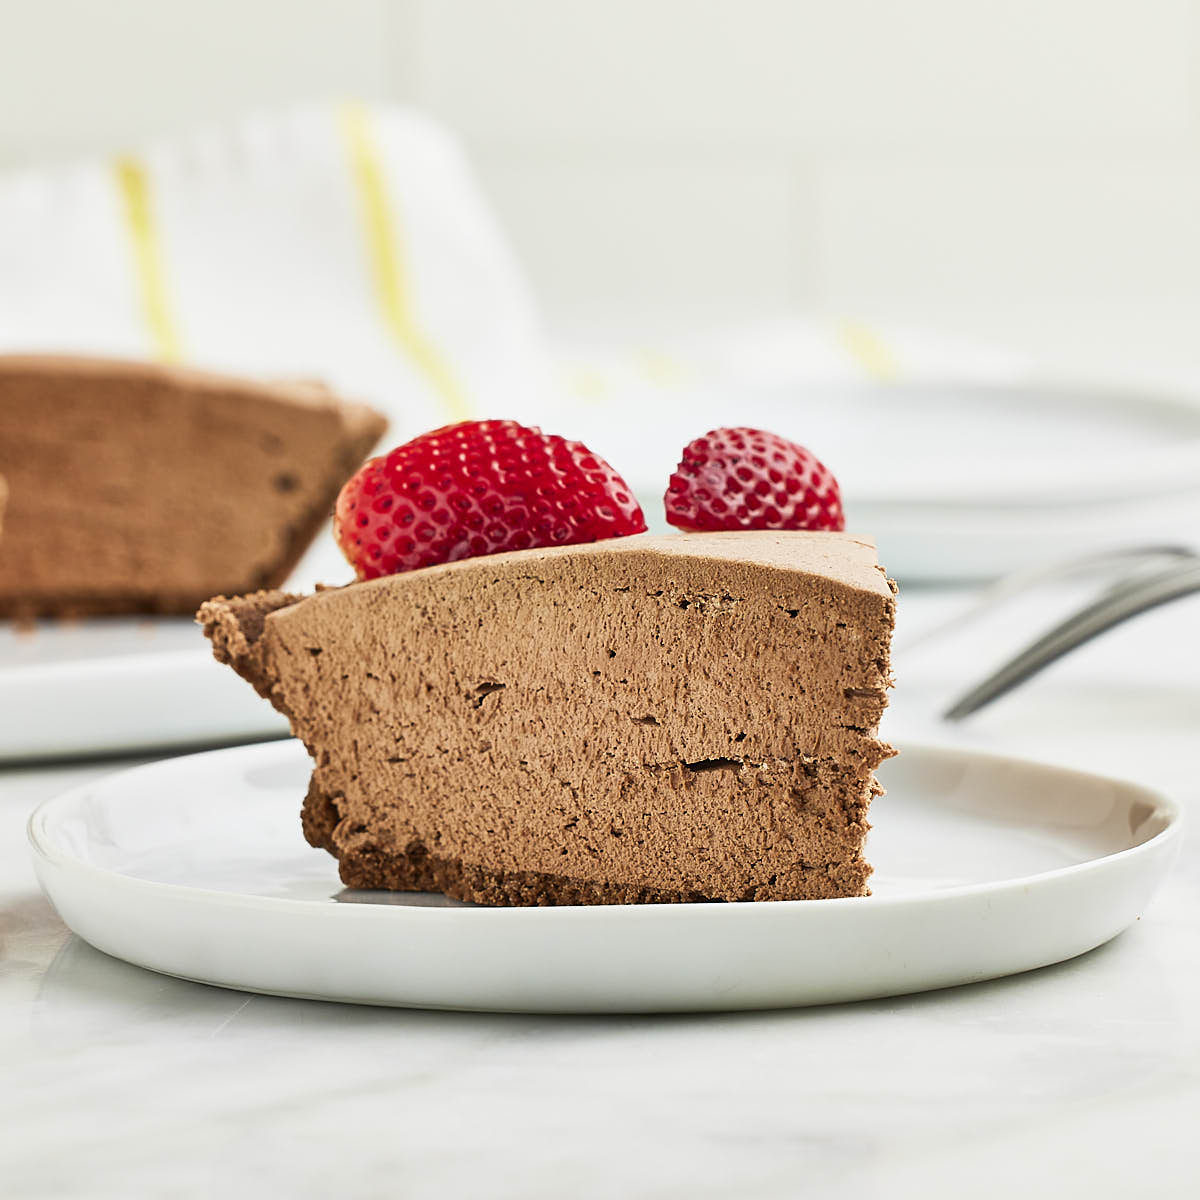 Closeup of a Chocolate Cheesecake on a white plate.